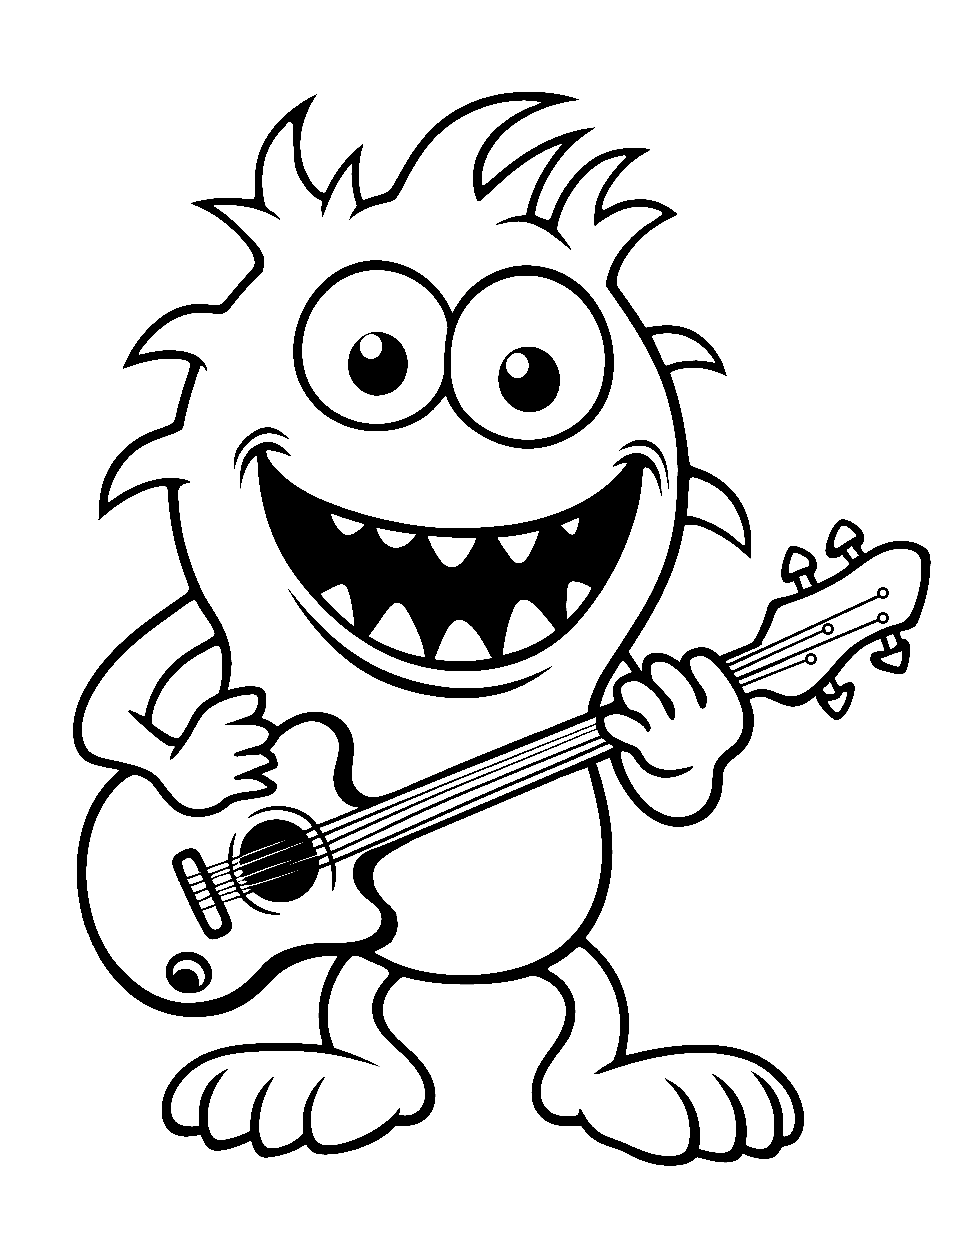 Monster Playing a Guitar Coloring Page - A cool monster strumming a guitar.